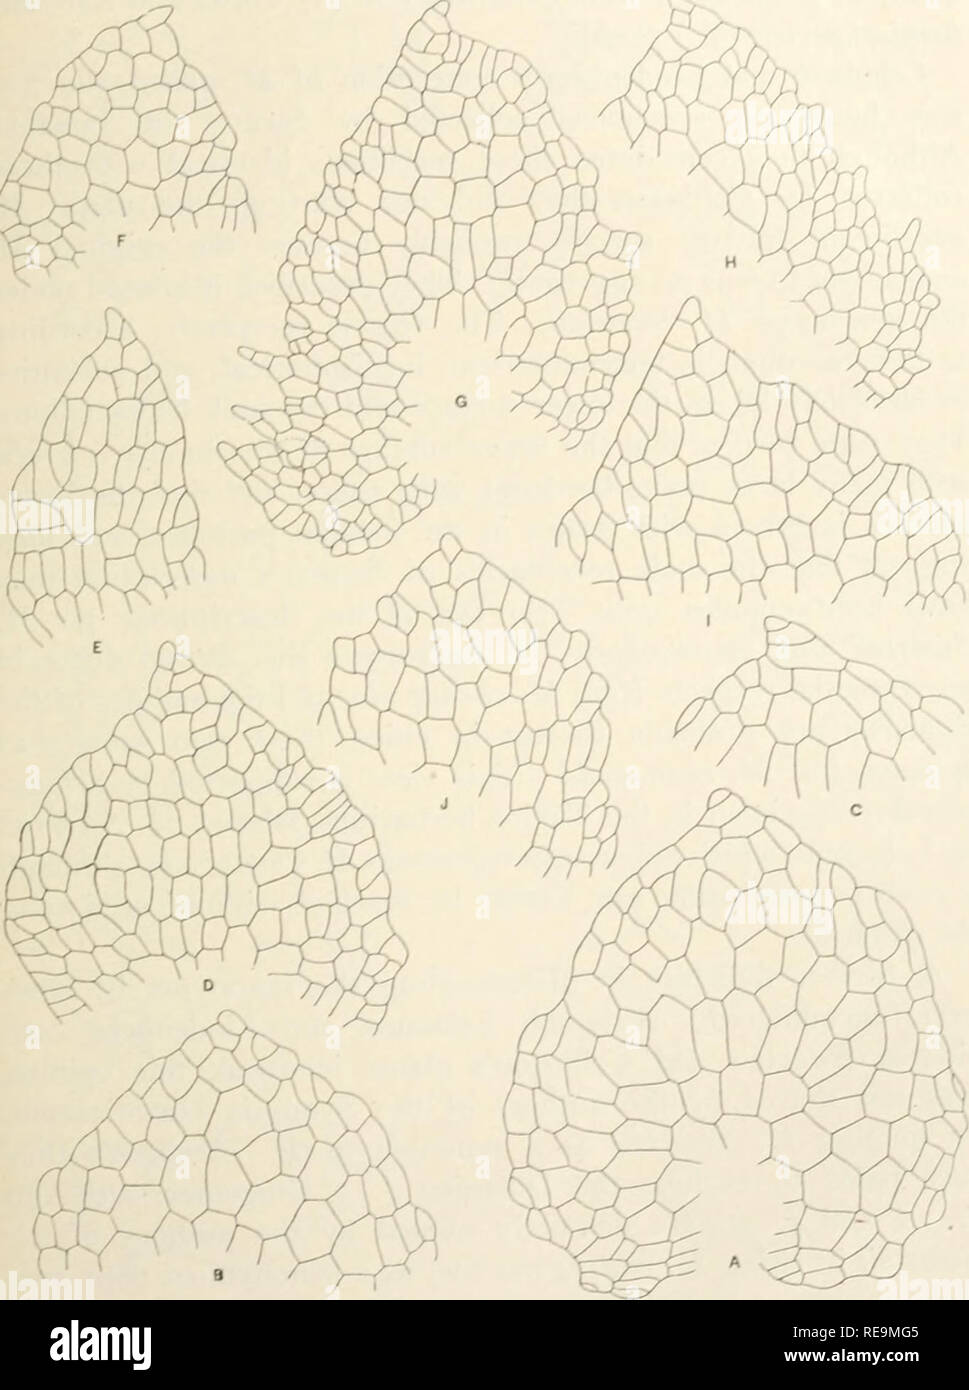 . Contributions from the Osborn Botanical Laboratory. Plants. American Species of Marchaniia. 303 /. ^A shows a plant with numerous cupules and female recep- tacles, while /. 3C shows a small forking fragment with cupules. Fig. 18. Marchantia chenopoda L. Appendages of ventral scales, x 100 A-C. PeruC..^ toHvia'H ^//' D-F Bolivia, A. d'Orbigny, type of M. peruviana. G, H. Bolivia, /i. li. Rusby 3004. I, J. Bolivia, P. Jay 71- only. The receptacles are so strongly convex that they appear conical and resemble those of Conocephalum comcum (L) Dumort. In fact, according to Lehmann and Lmdenberg, t Stock Photo